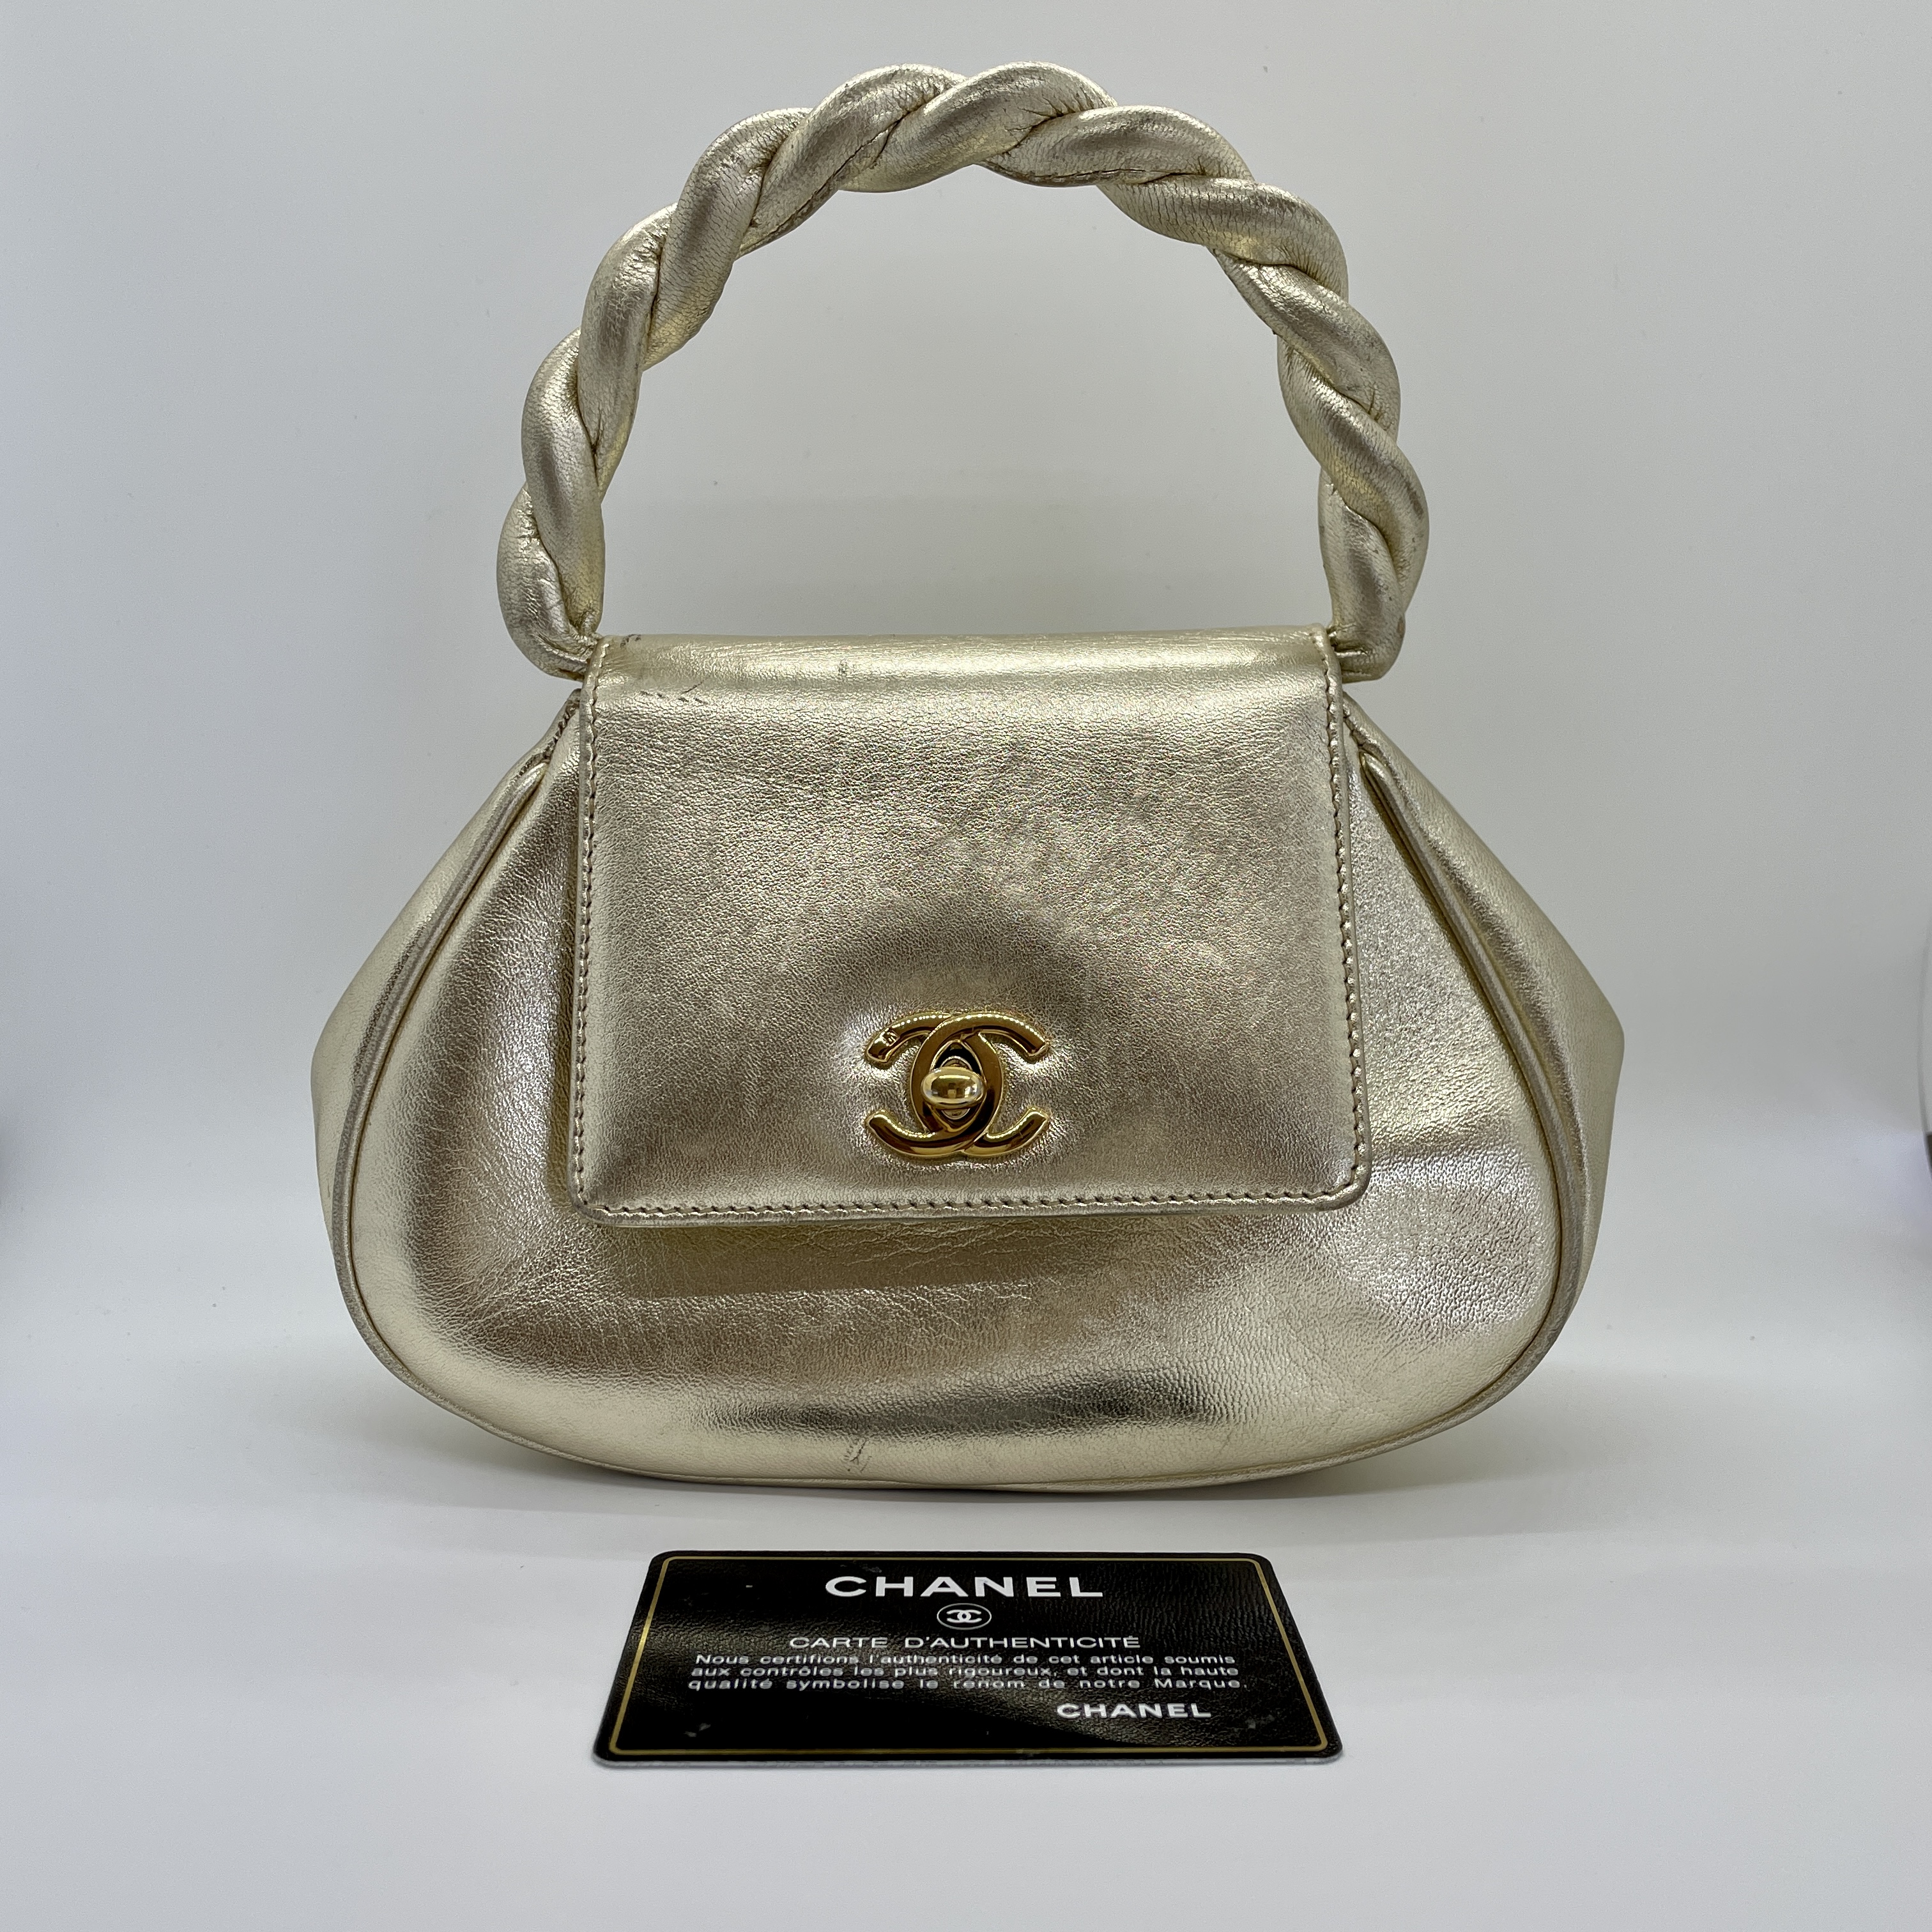 chanel-double-quilted-bag - Bal Harbour Shops